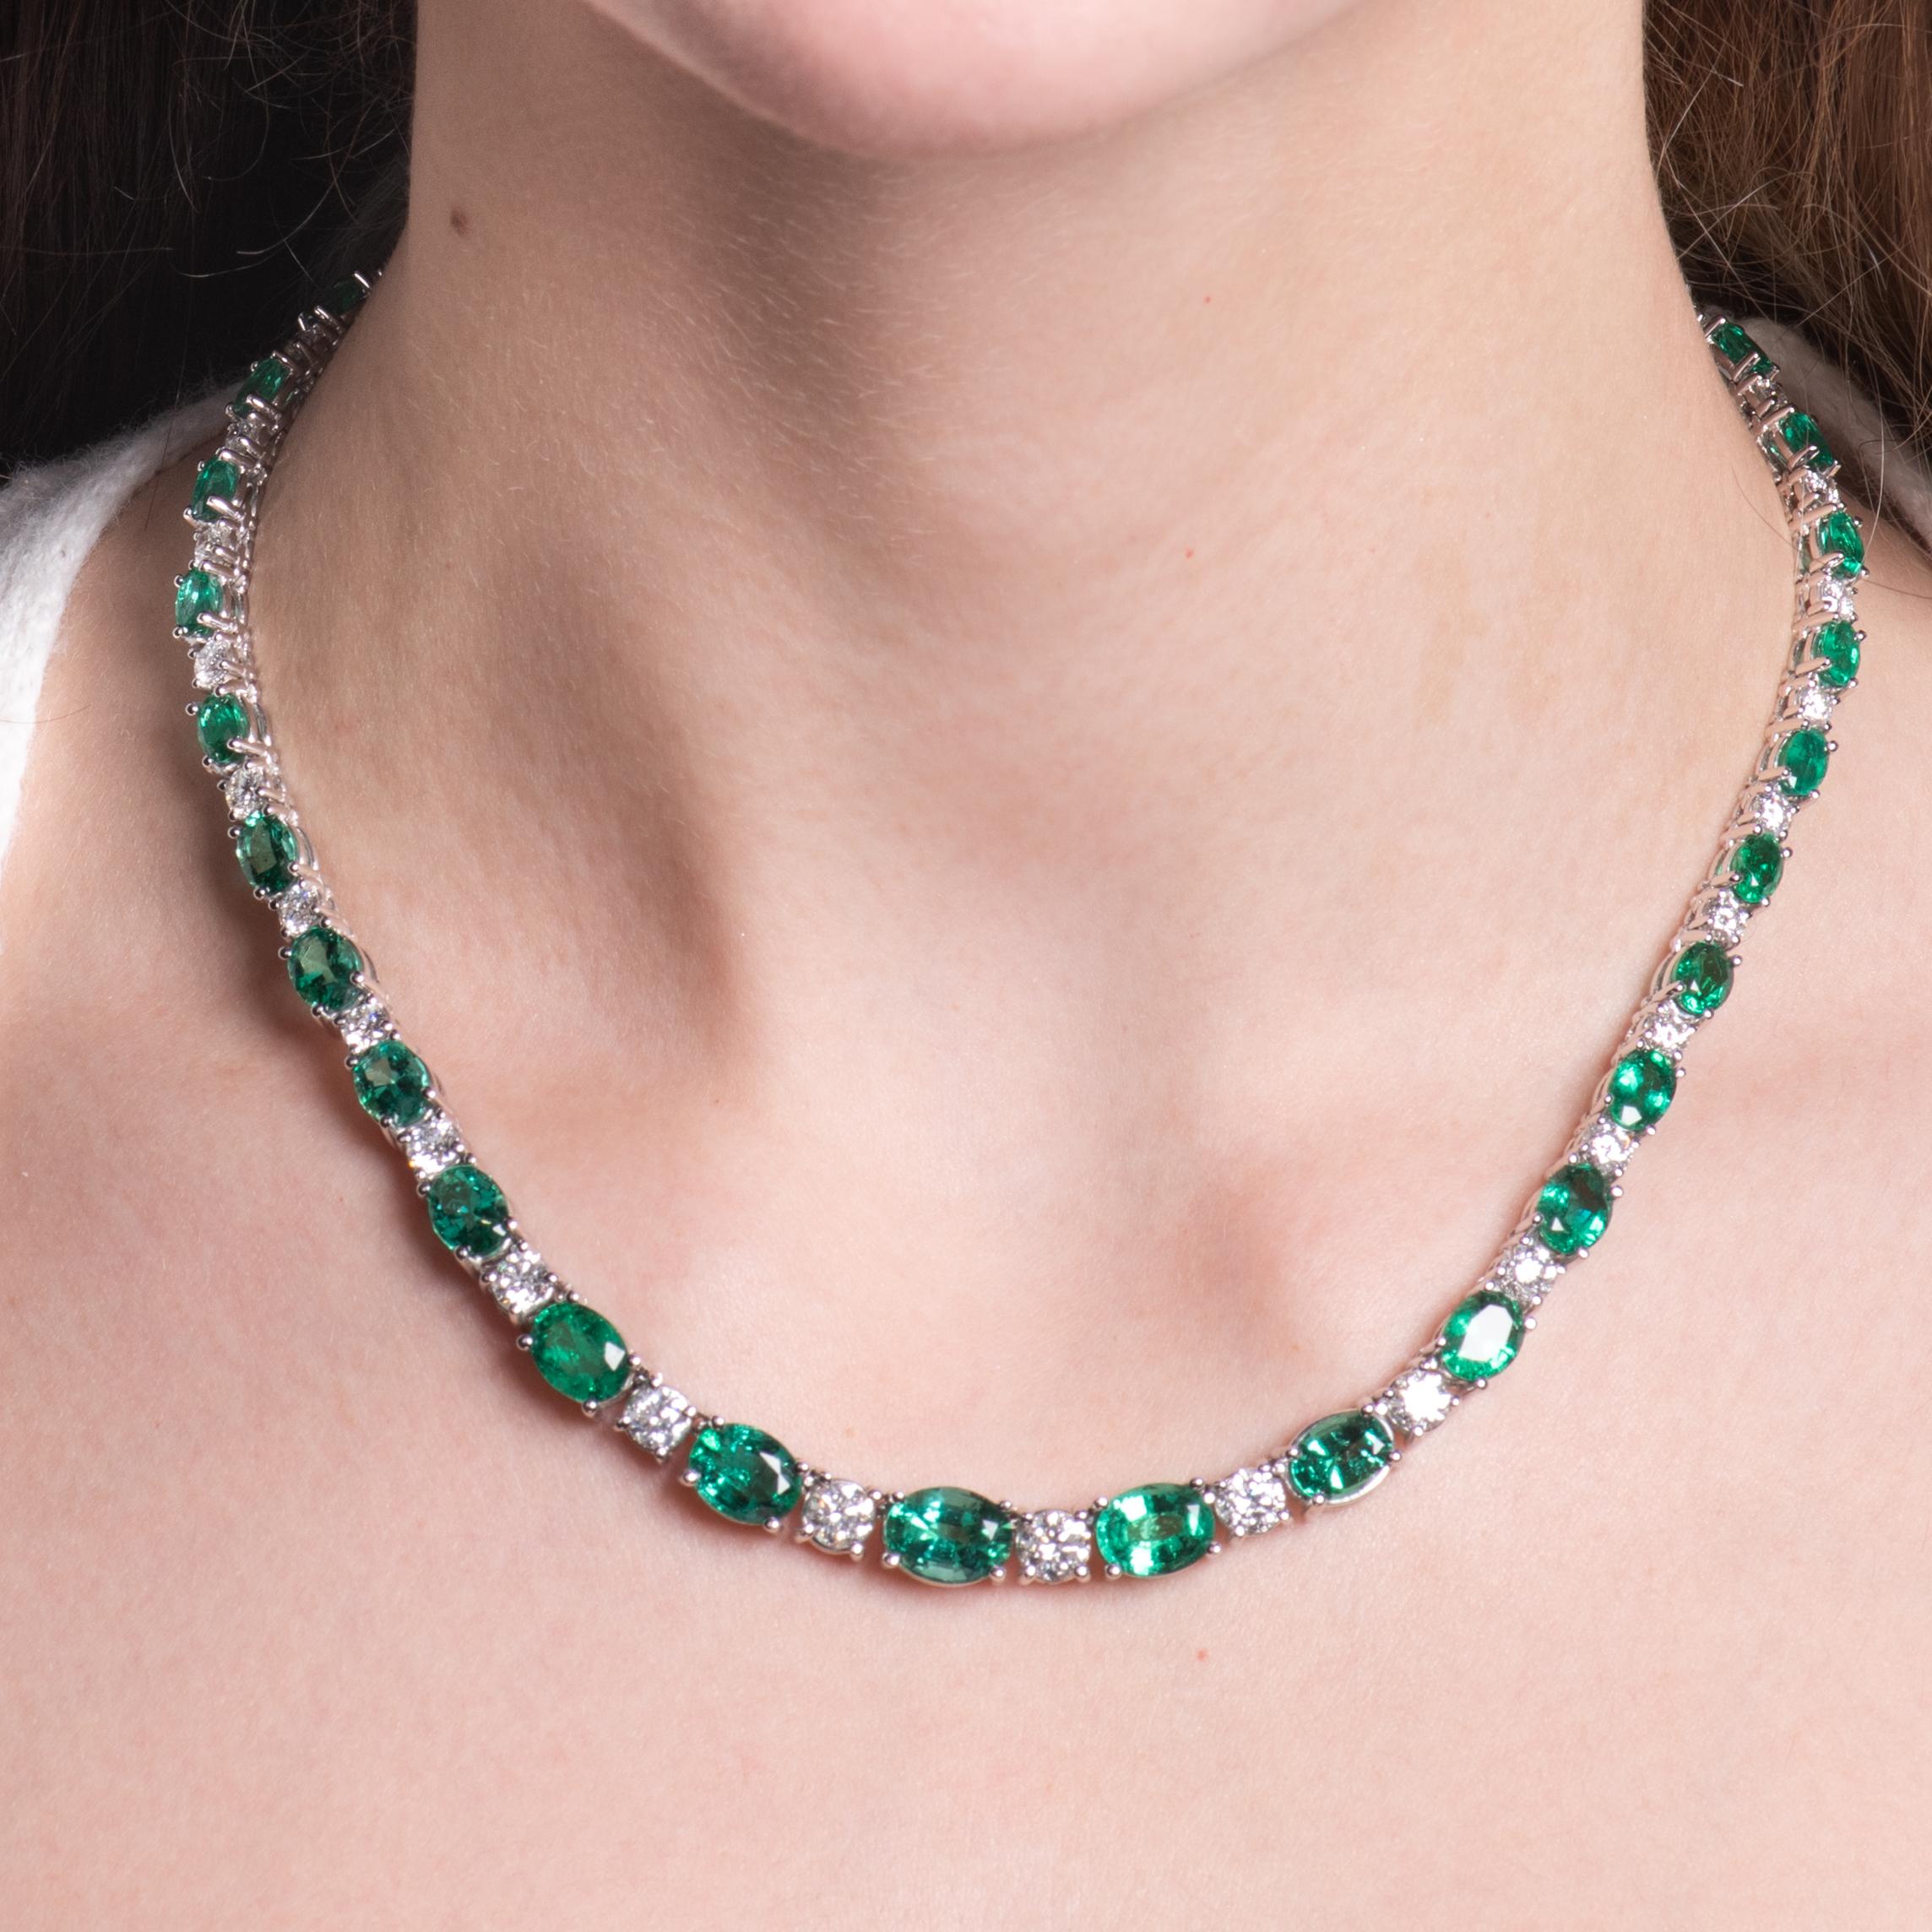 This exquisite emerald necklace has a 25.68ct total weight in oval cut emeralds and 8.66ct total weight in round diamonds. The emerald stones have a medium to strong saturation of bright lime green color, and they are especially clean for emeralds.